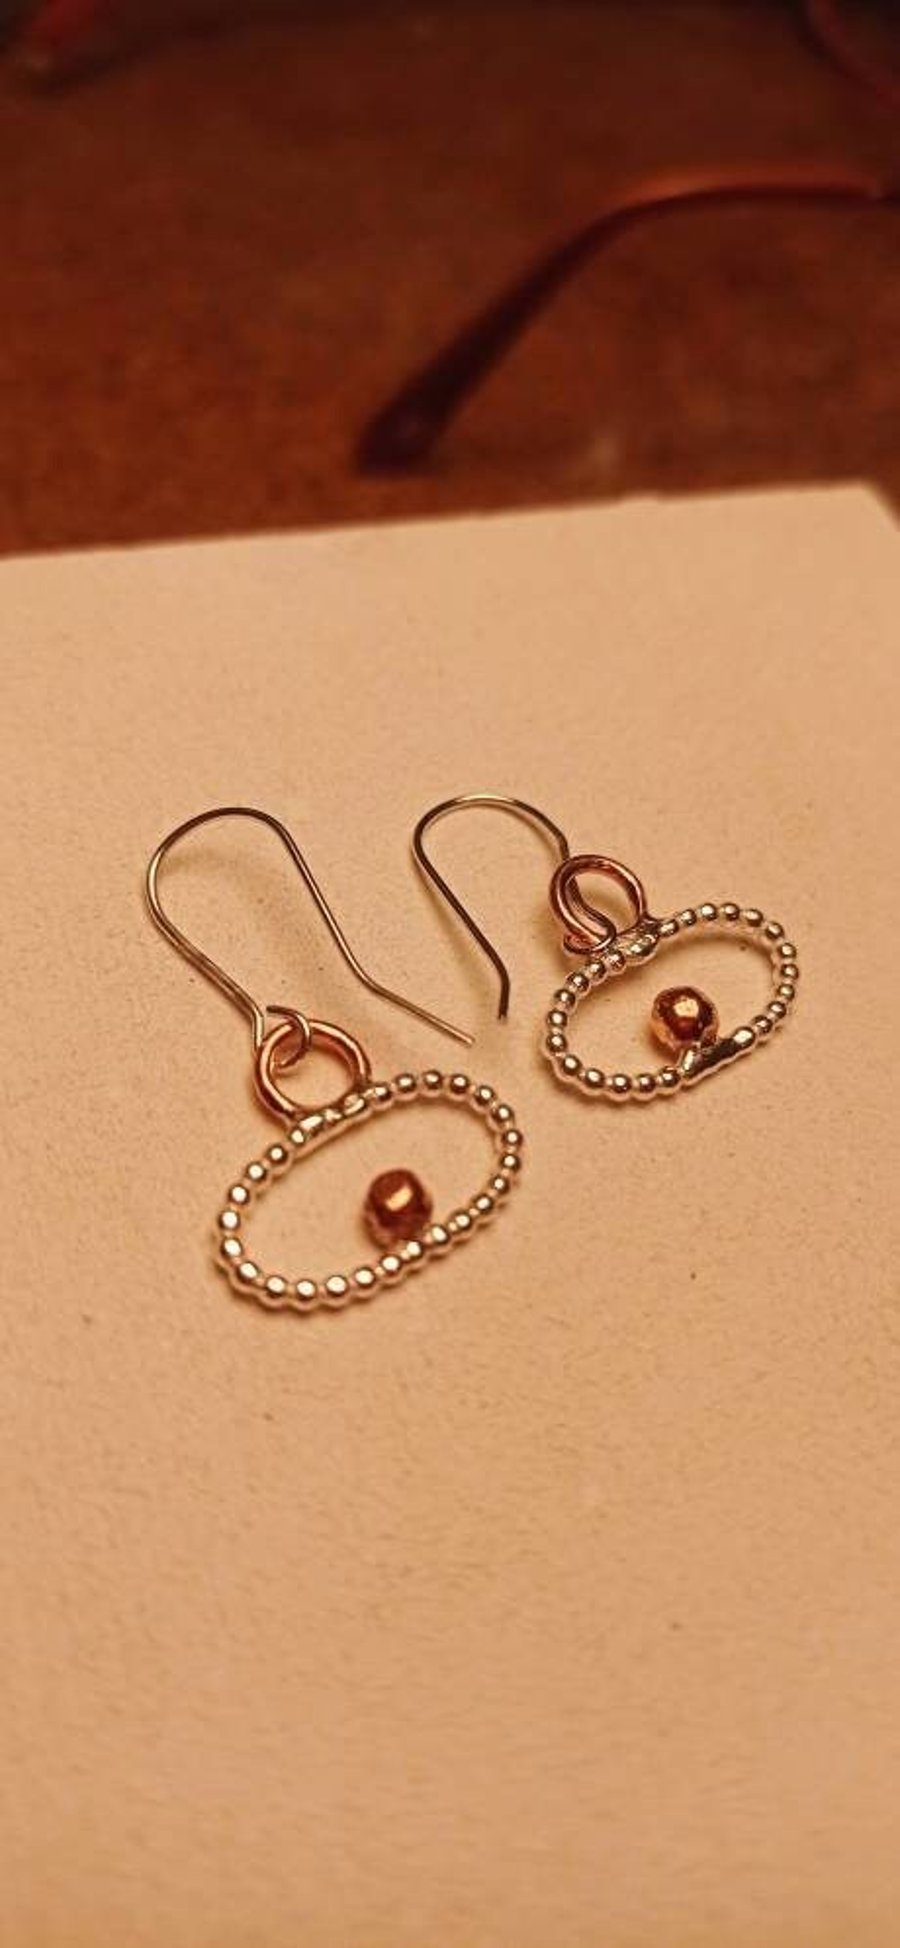 Contemporary silver and Copper earrings. Designer, Copper and silver jewellery.